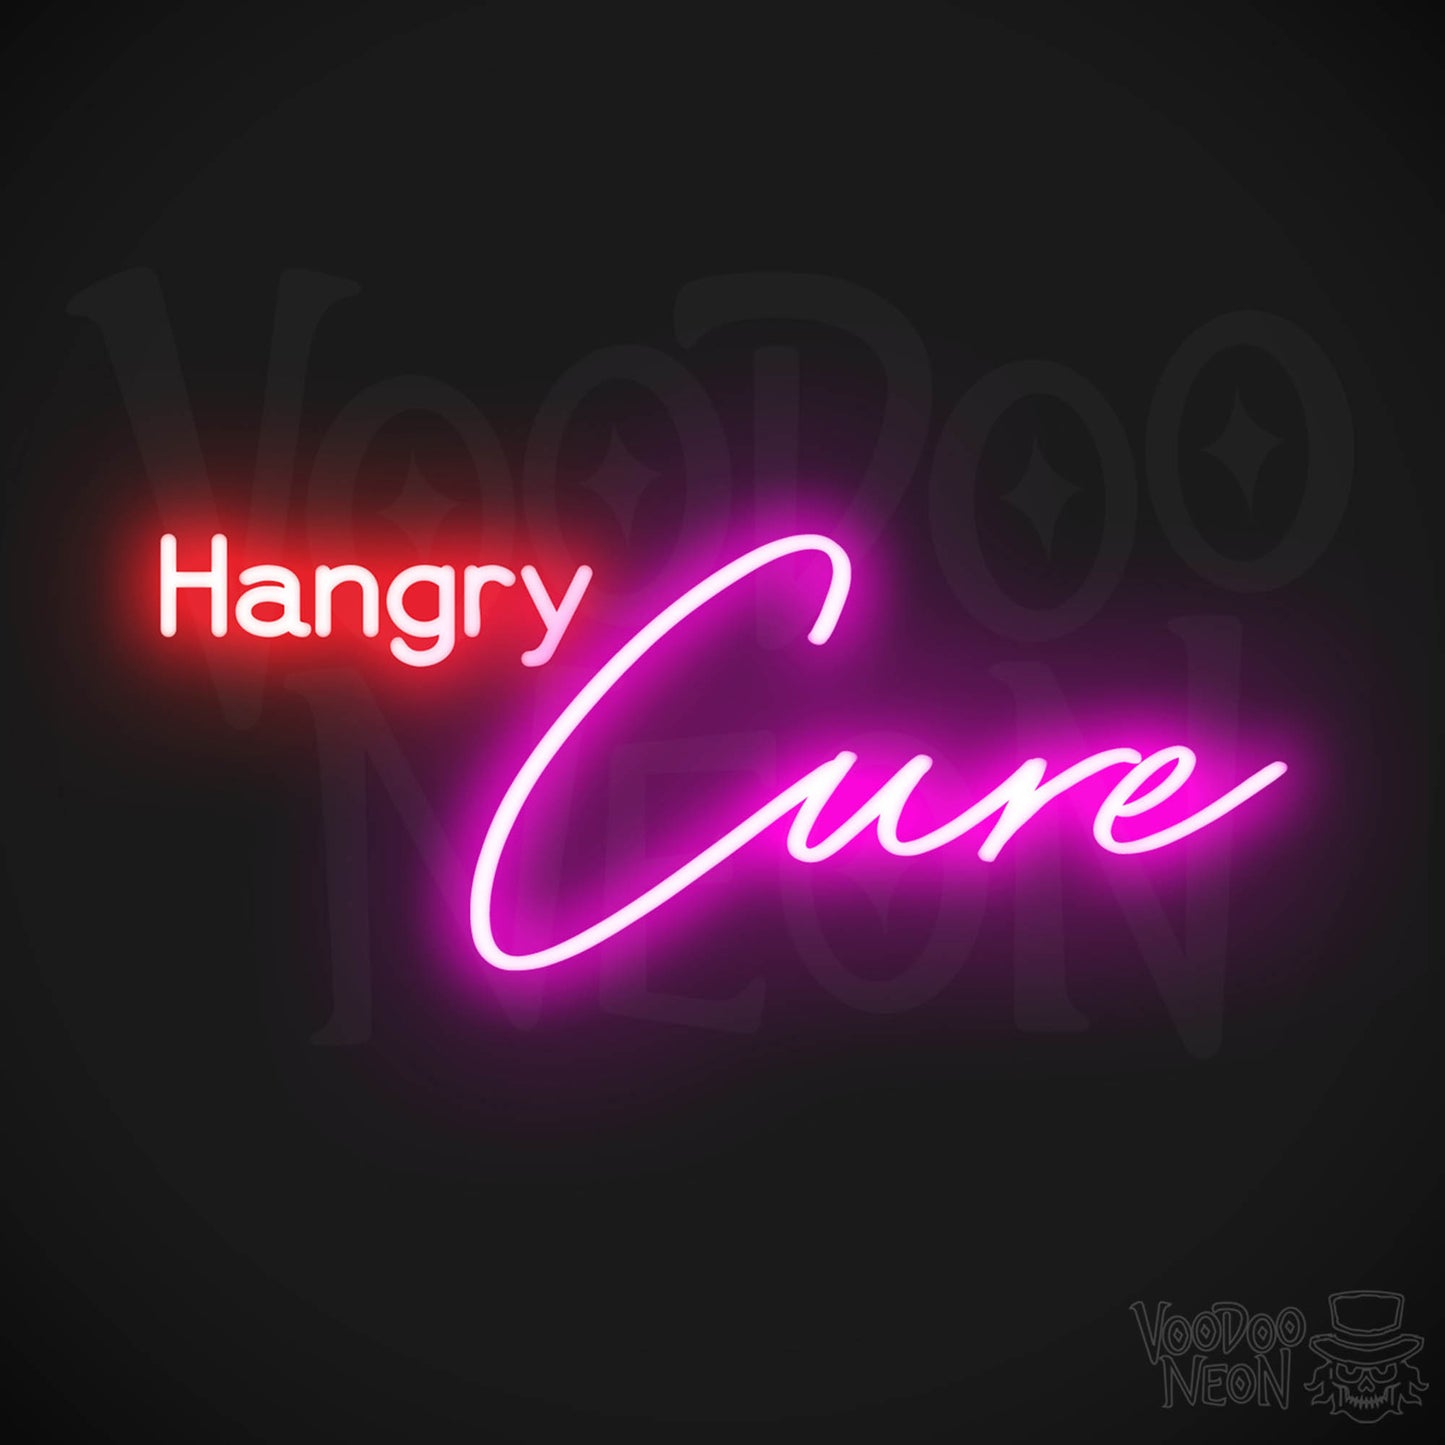 Hangry Cure LED Neon - Multi-Color